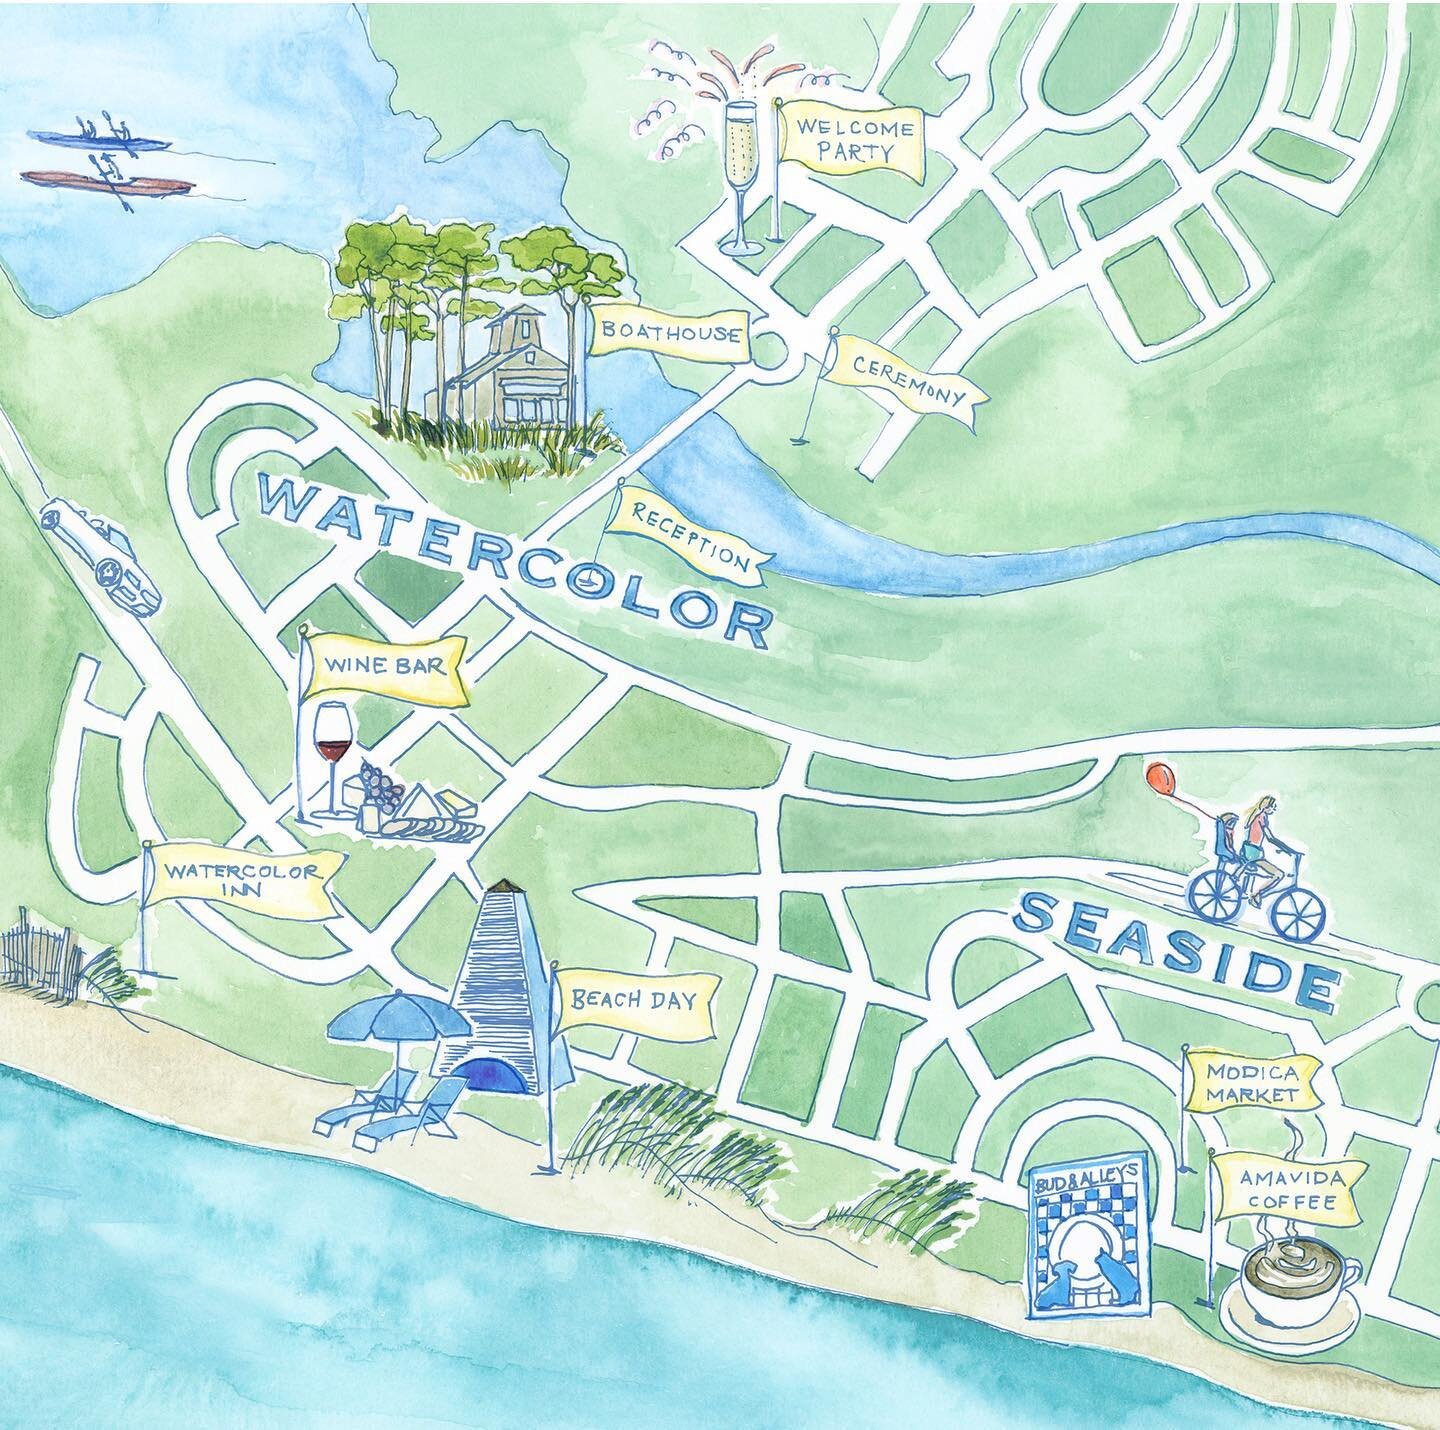 One of us has been on a, much deserved, getaway on 30A. It&rsquo;s a heavenly spot with the prettiest white beaches. (This map is from a wedding we designed down there.) Something about the salty air and toes in the sand that will fill your soul. 
.
